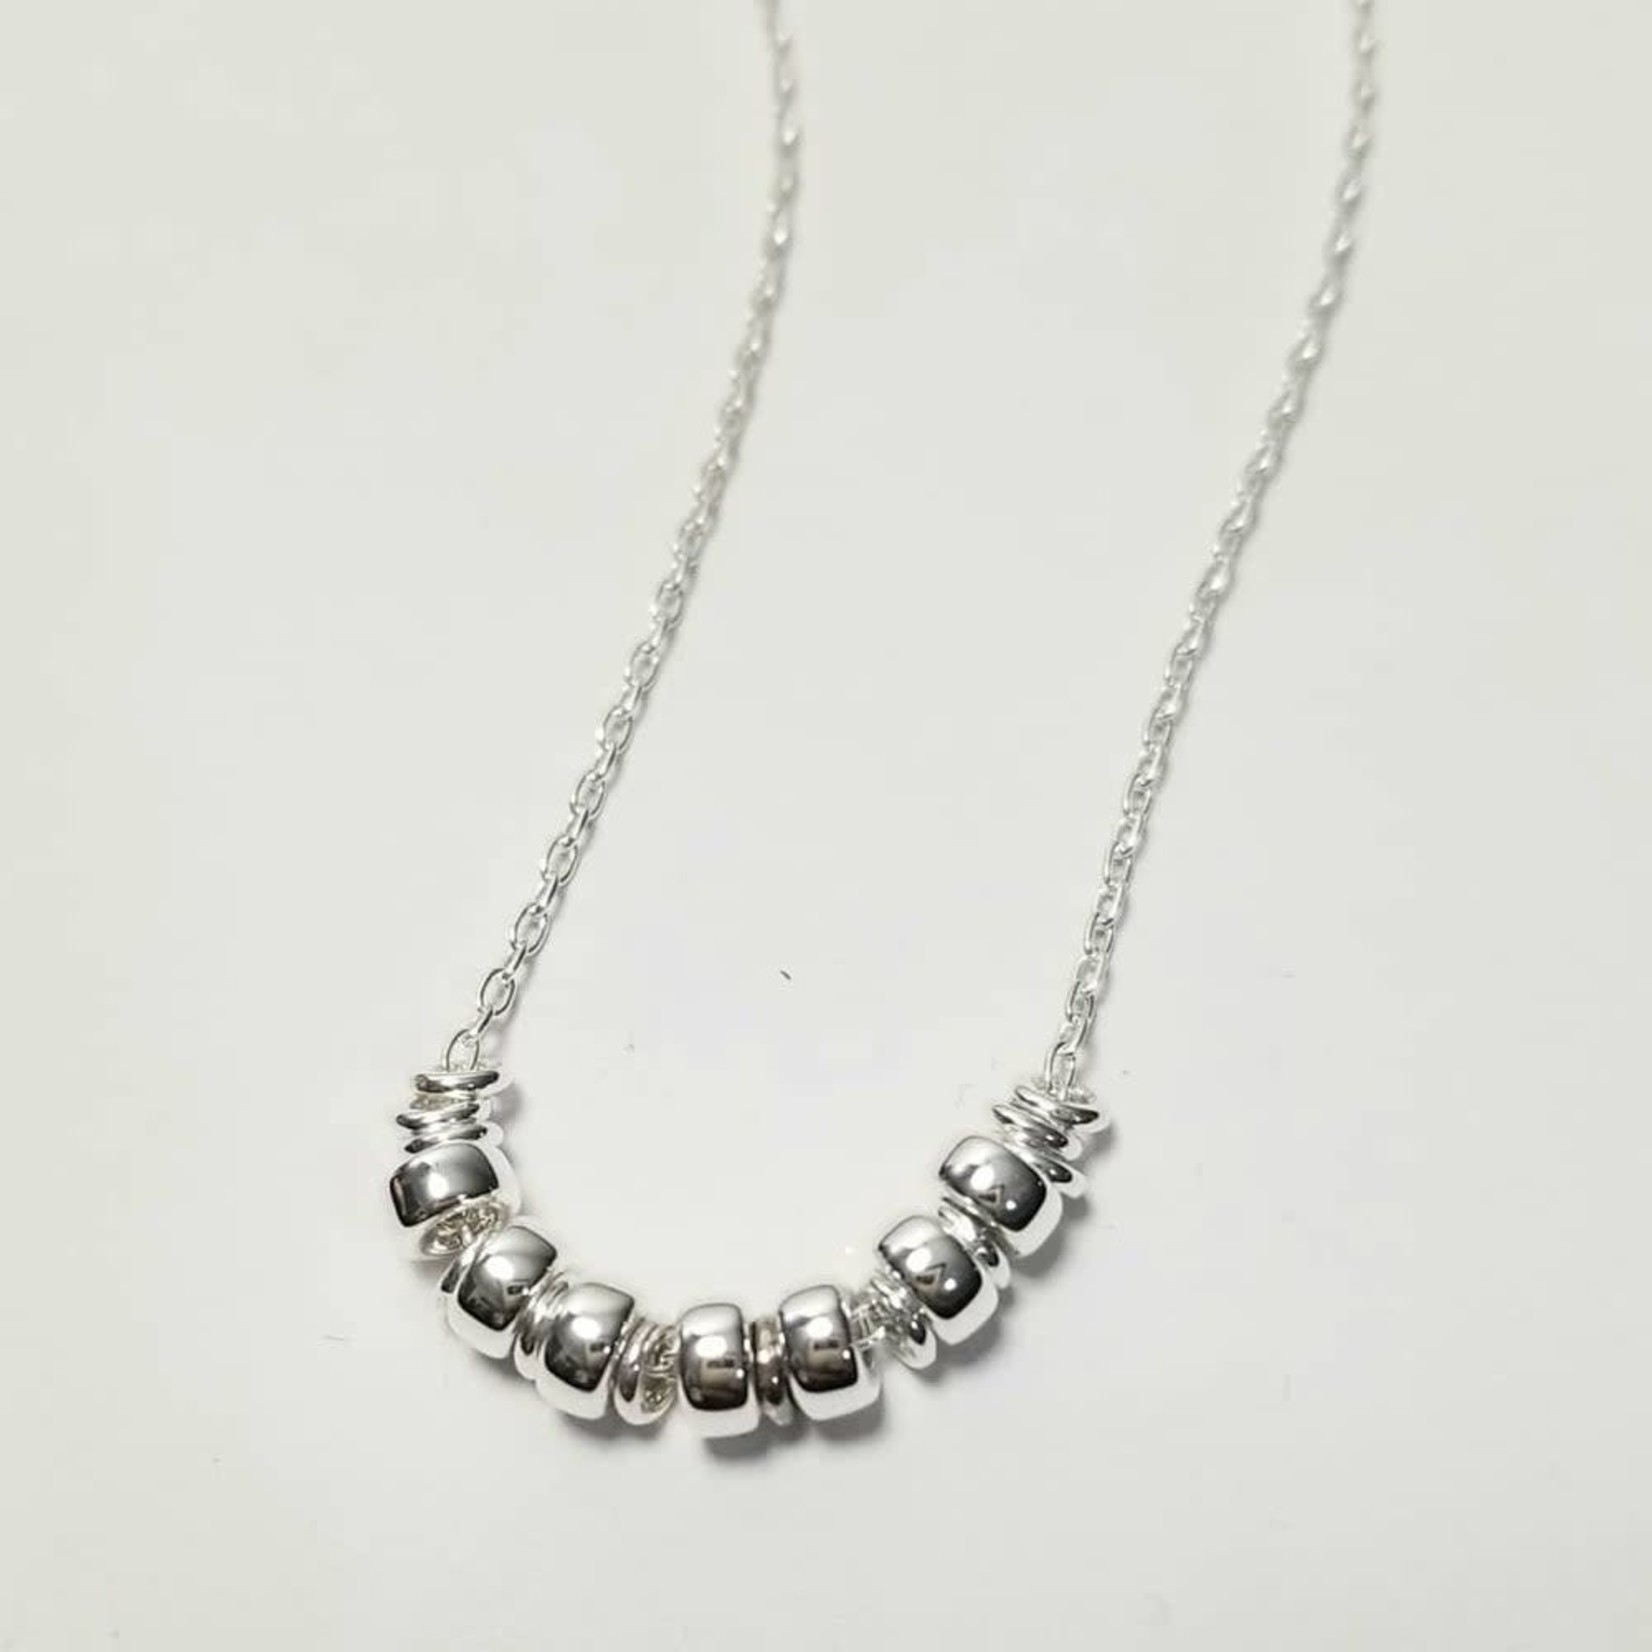 BRIGHTON Meridian Petite Short Necklace Silver - Amber Marie and Company